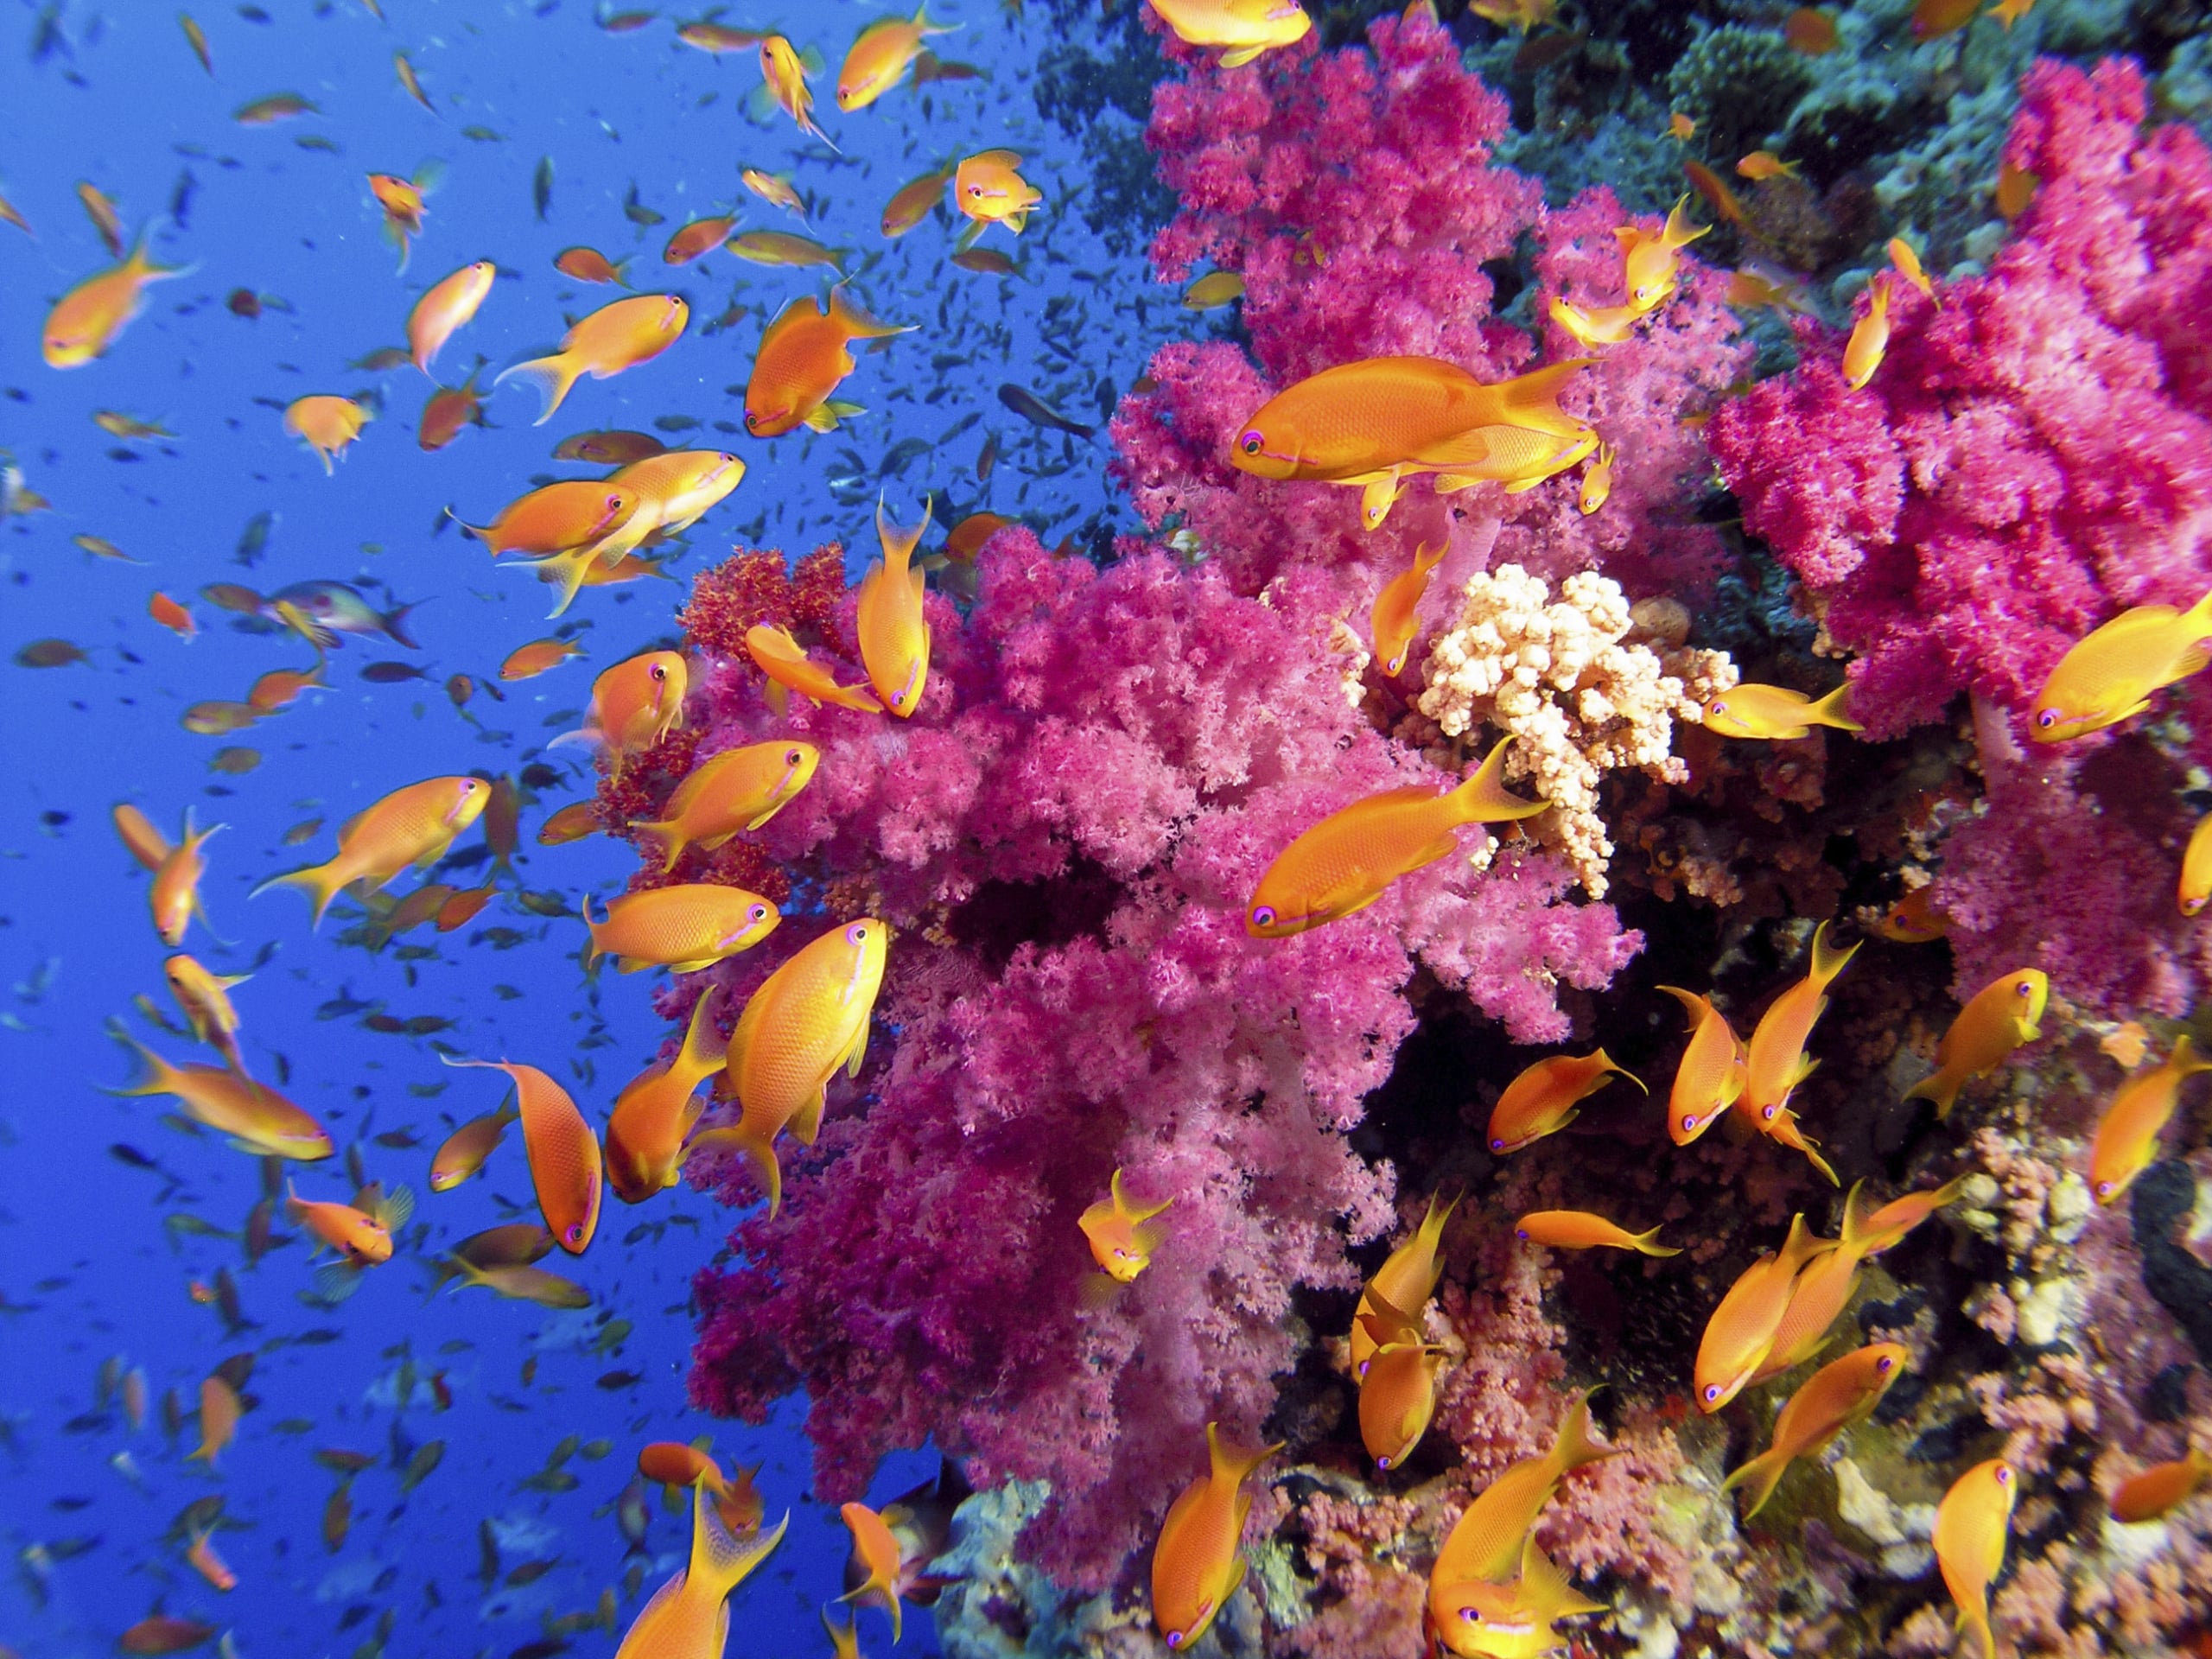 Saving Coral Reefs Depends More on Protecting Fish Than Safeguarding Locations